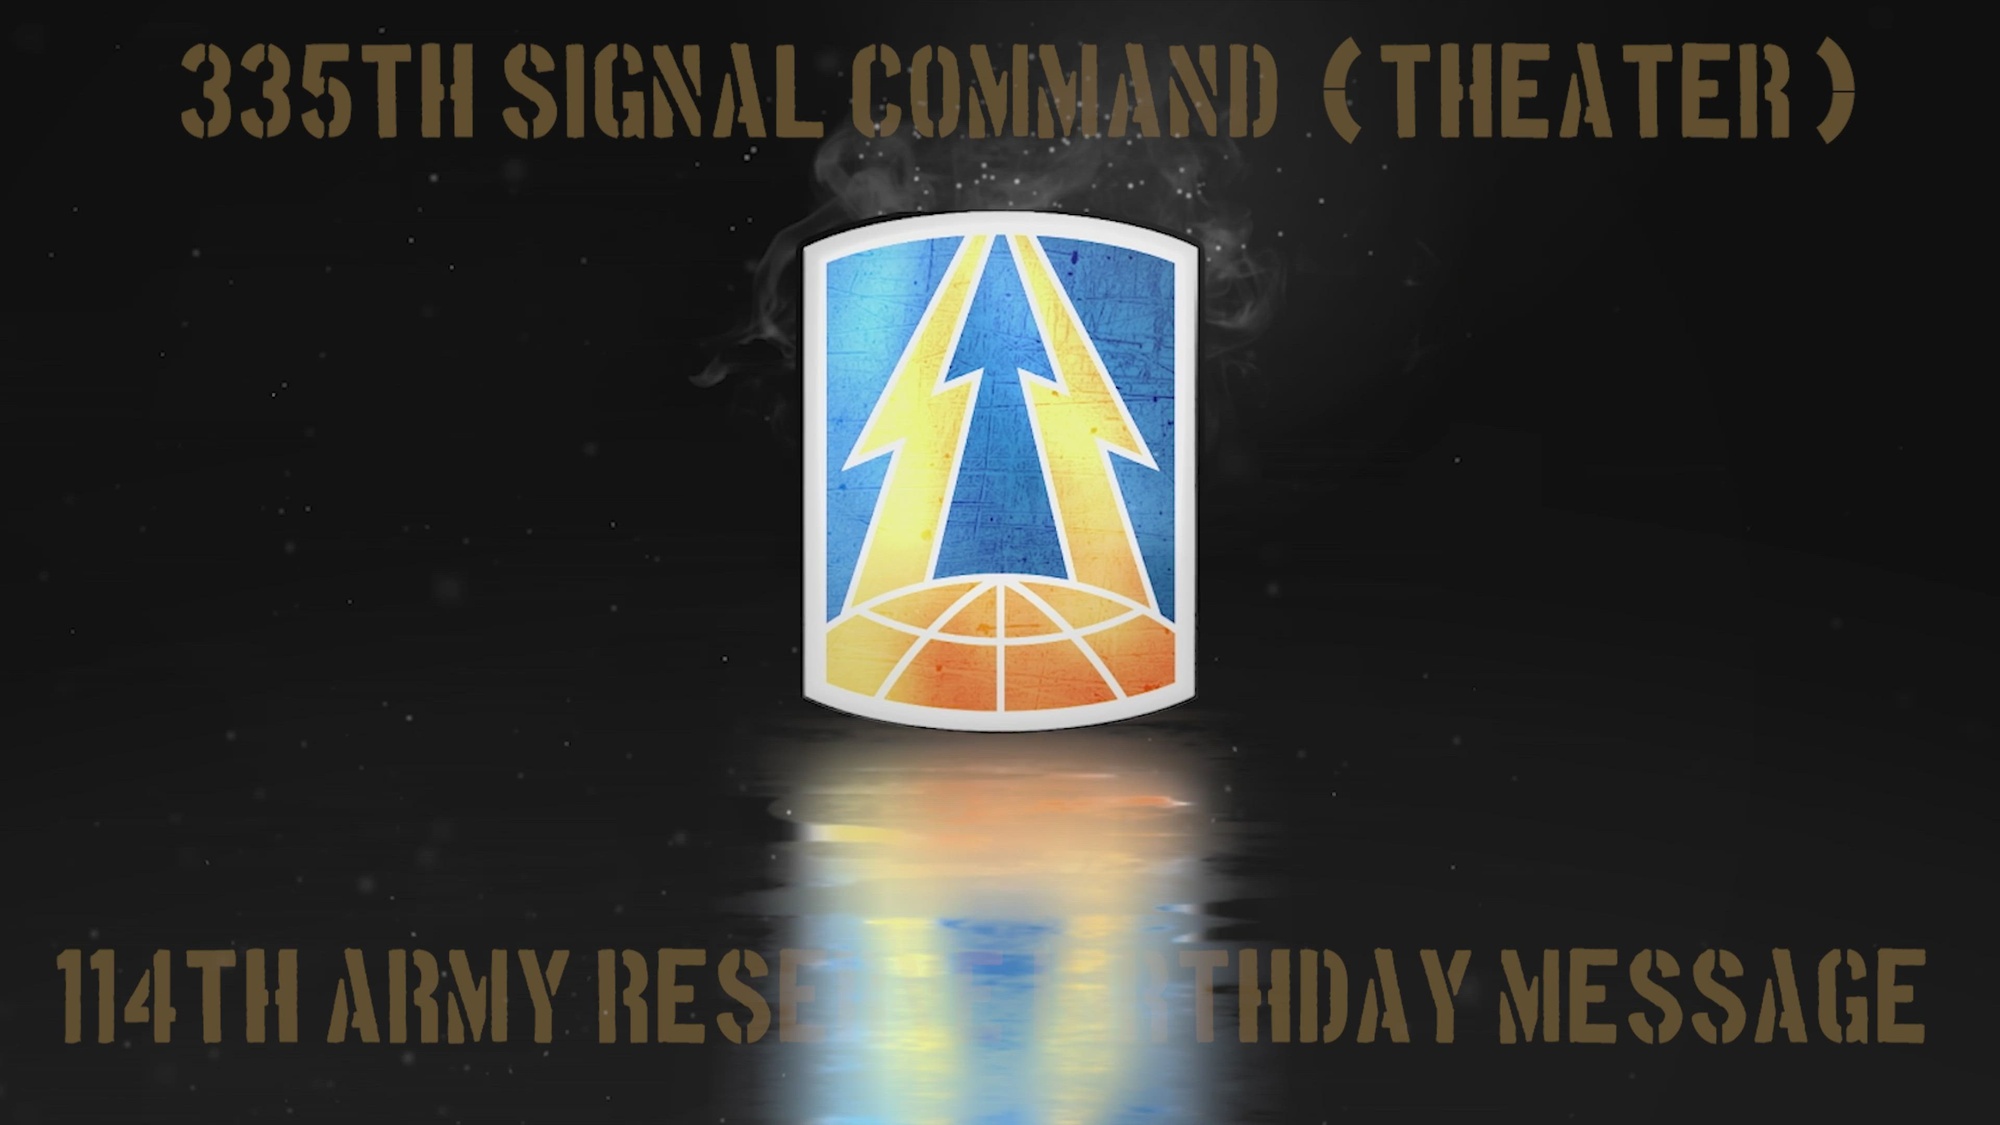 East Point, Georgia – The Headquarters and Headquarters Company, 335th Signal Command (Theater), commemorates 114 years of Army Reserve history in service to the Army and the Nation with this motivating birthday shout-out video.

The 335th Signal Command (Theater) provides signal and cyber units in direct support of Army Central Command in Southwest Asia and combatant commanders throughout the globe. Its primary mission is to plan, engineer, install, operate, maintain, secure, and defend the Army’s portion of the Department of Defense Information Network in support of U.S. Army, Joint, and Combined Forces Commanders.